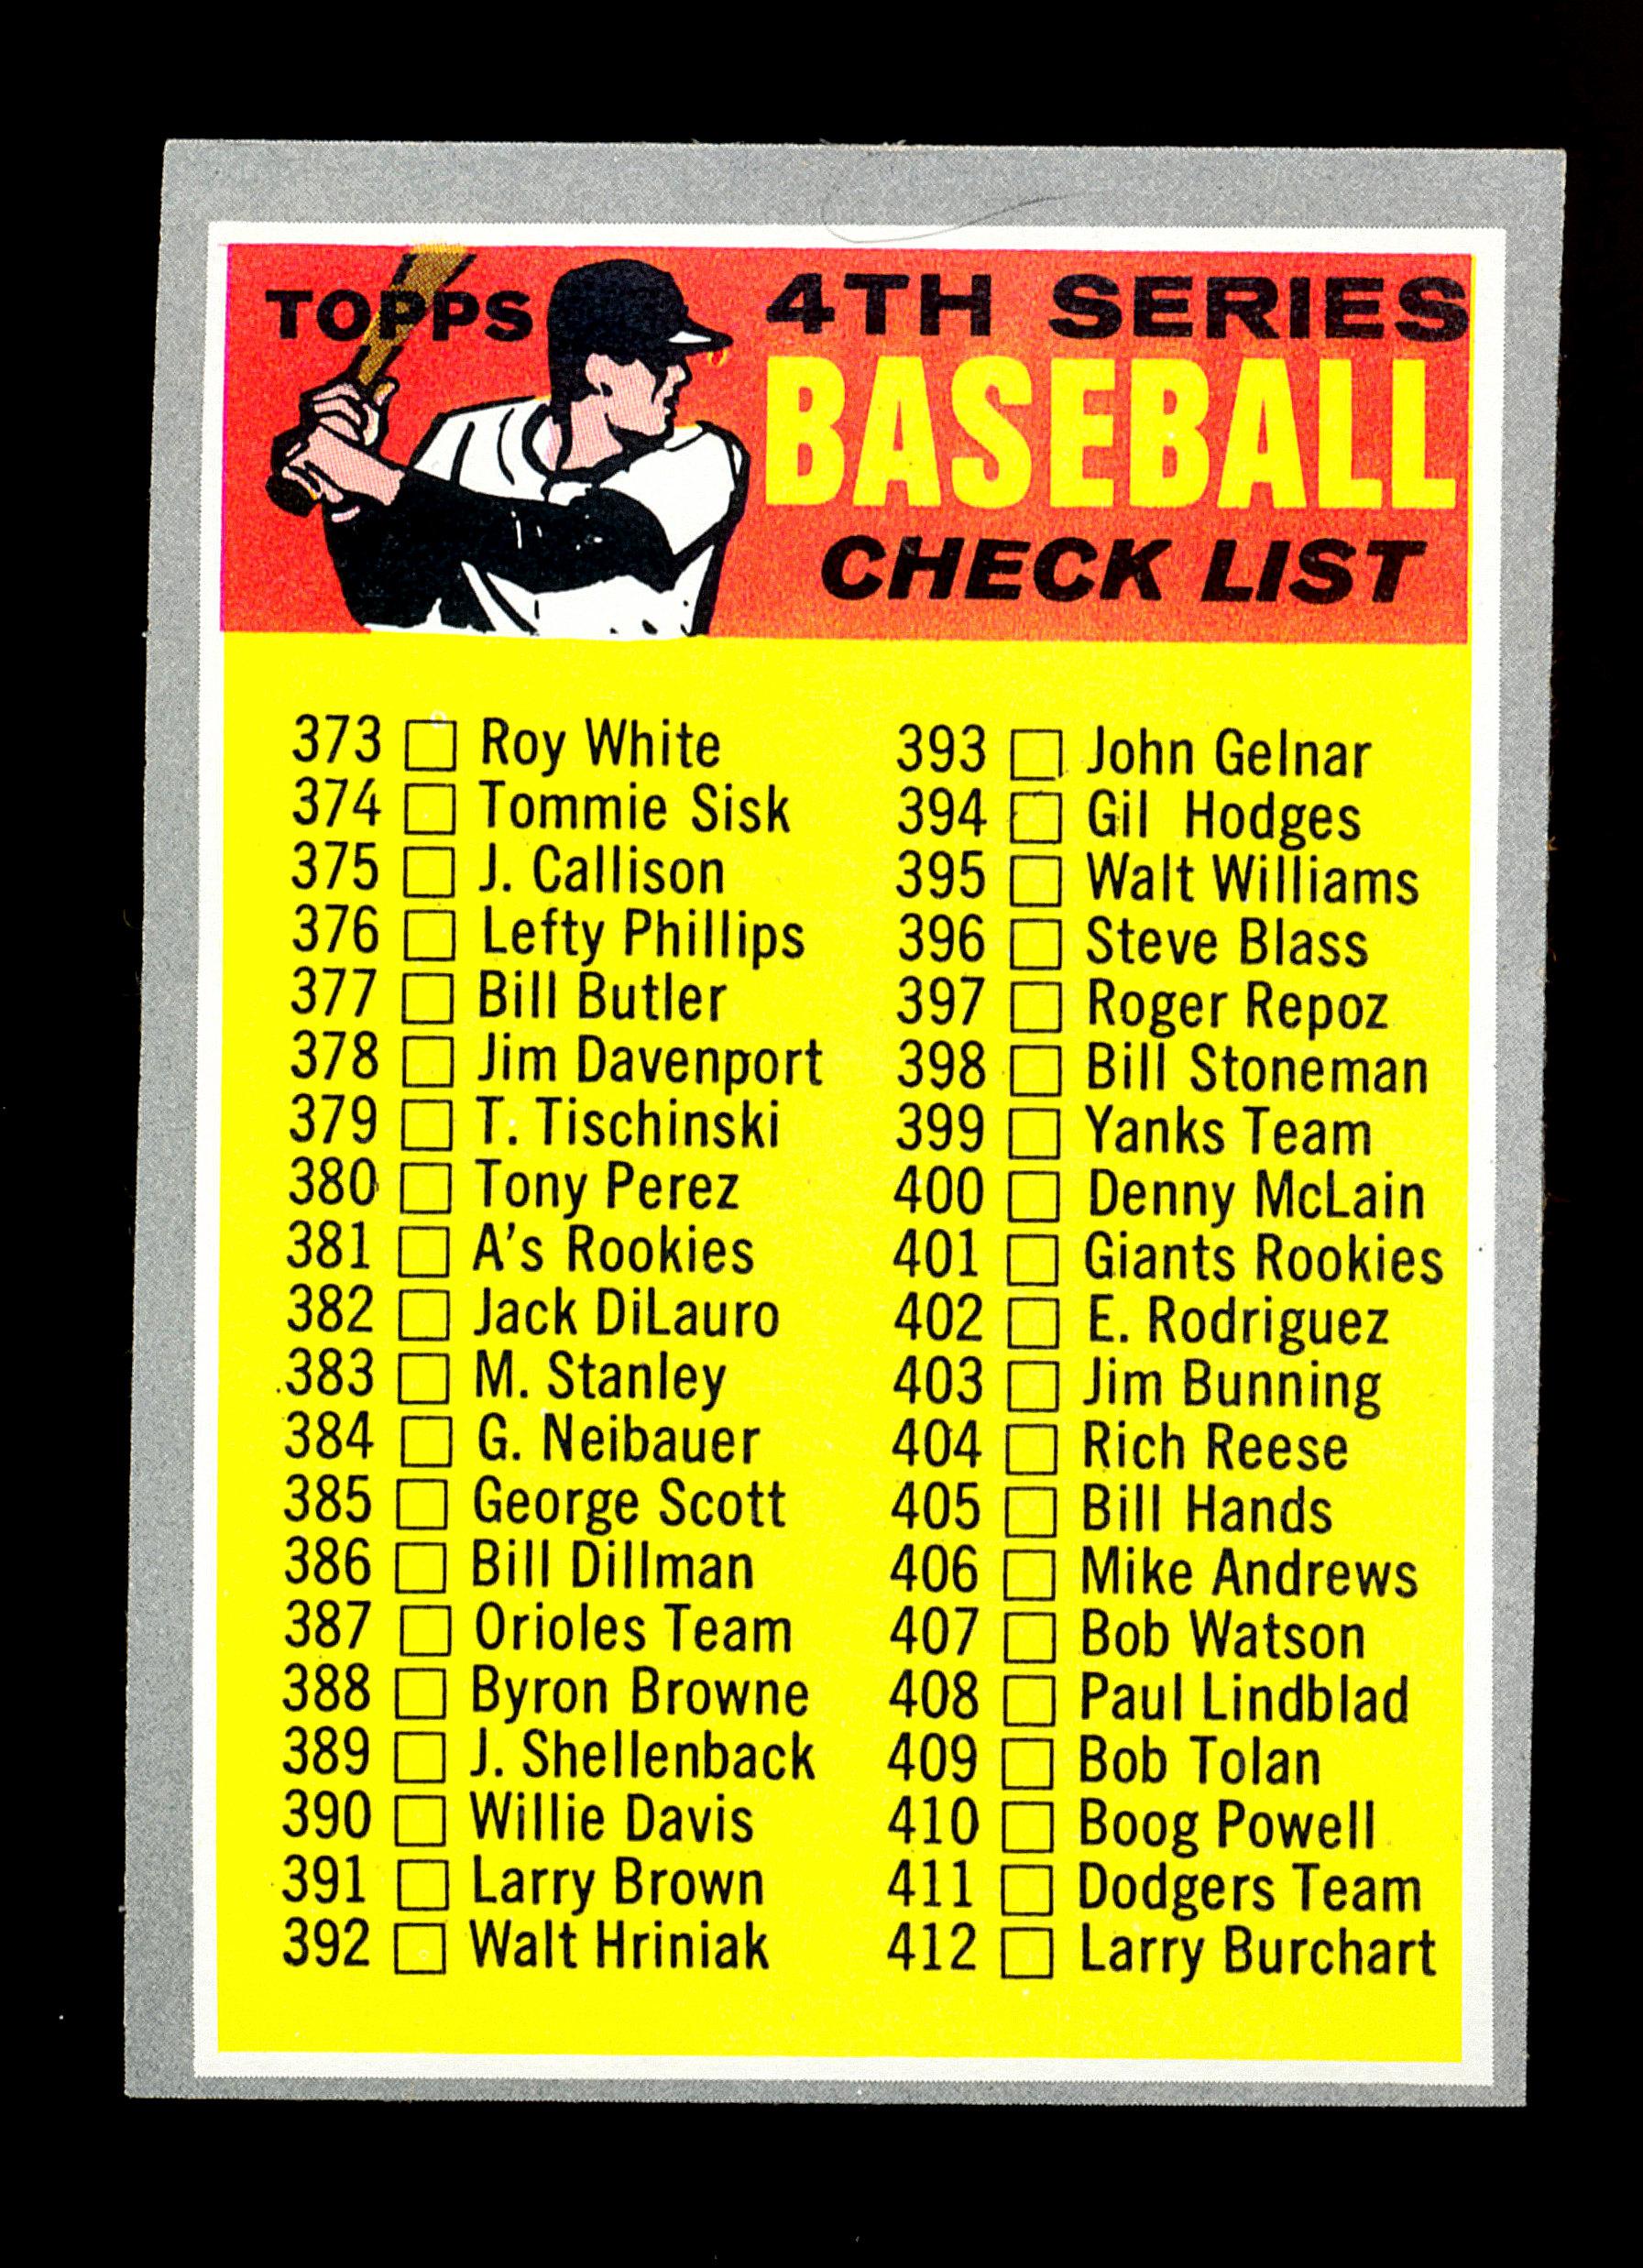 1970 Topps Baseball Card #343 4th Series Checklist 373-459 Unchecked